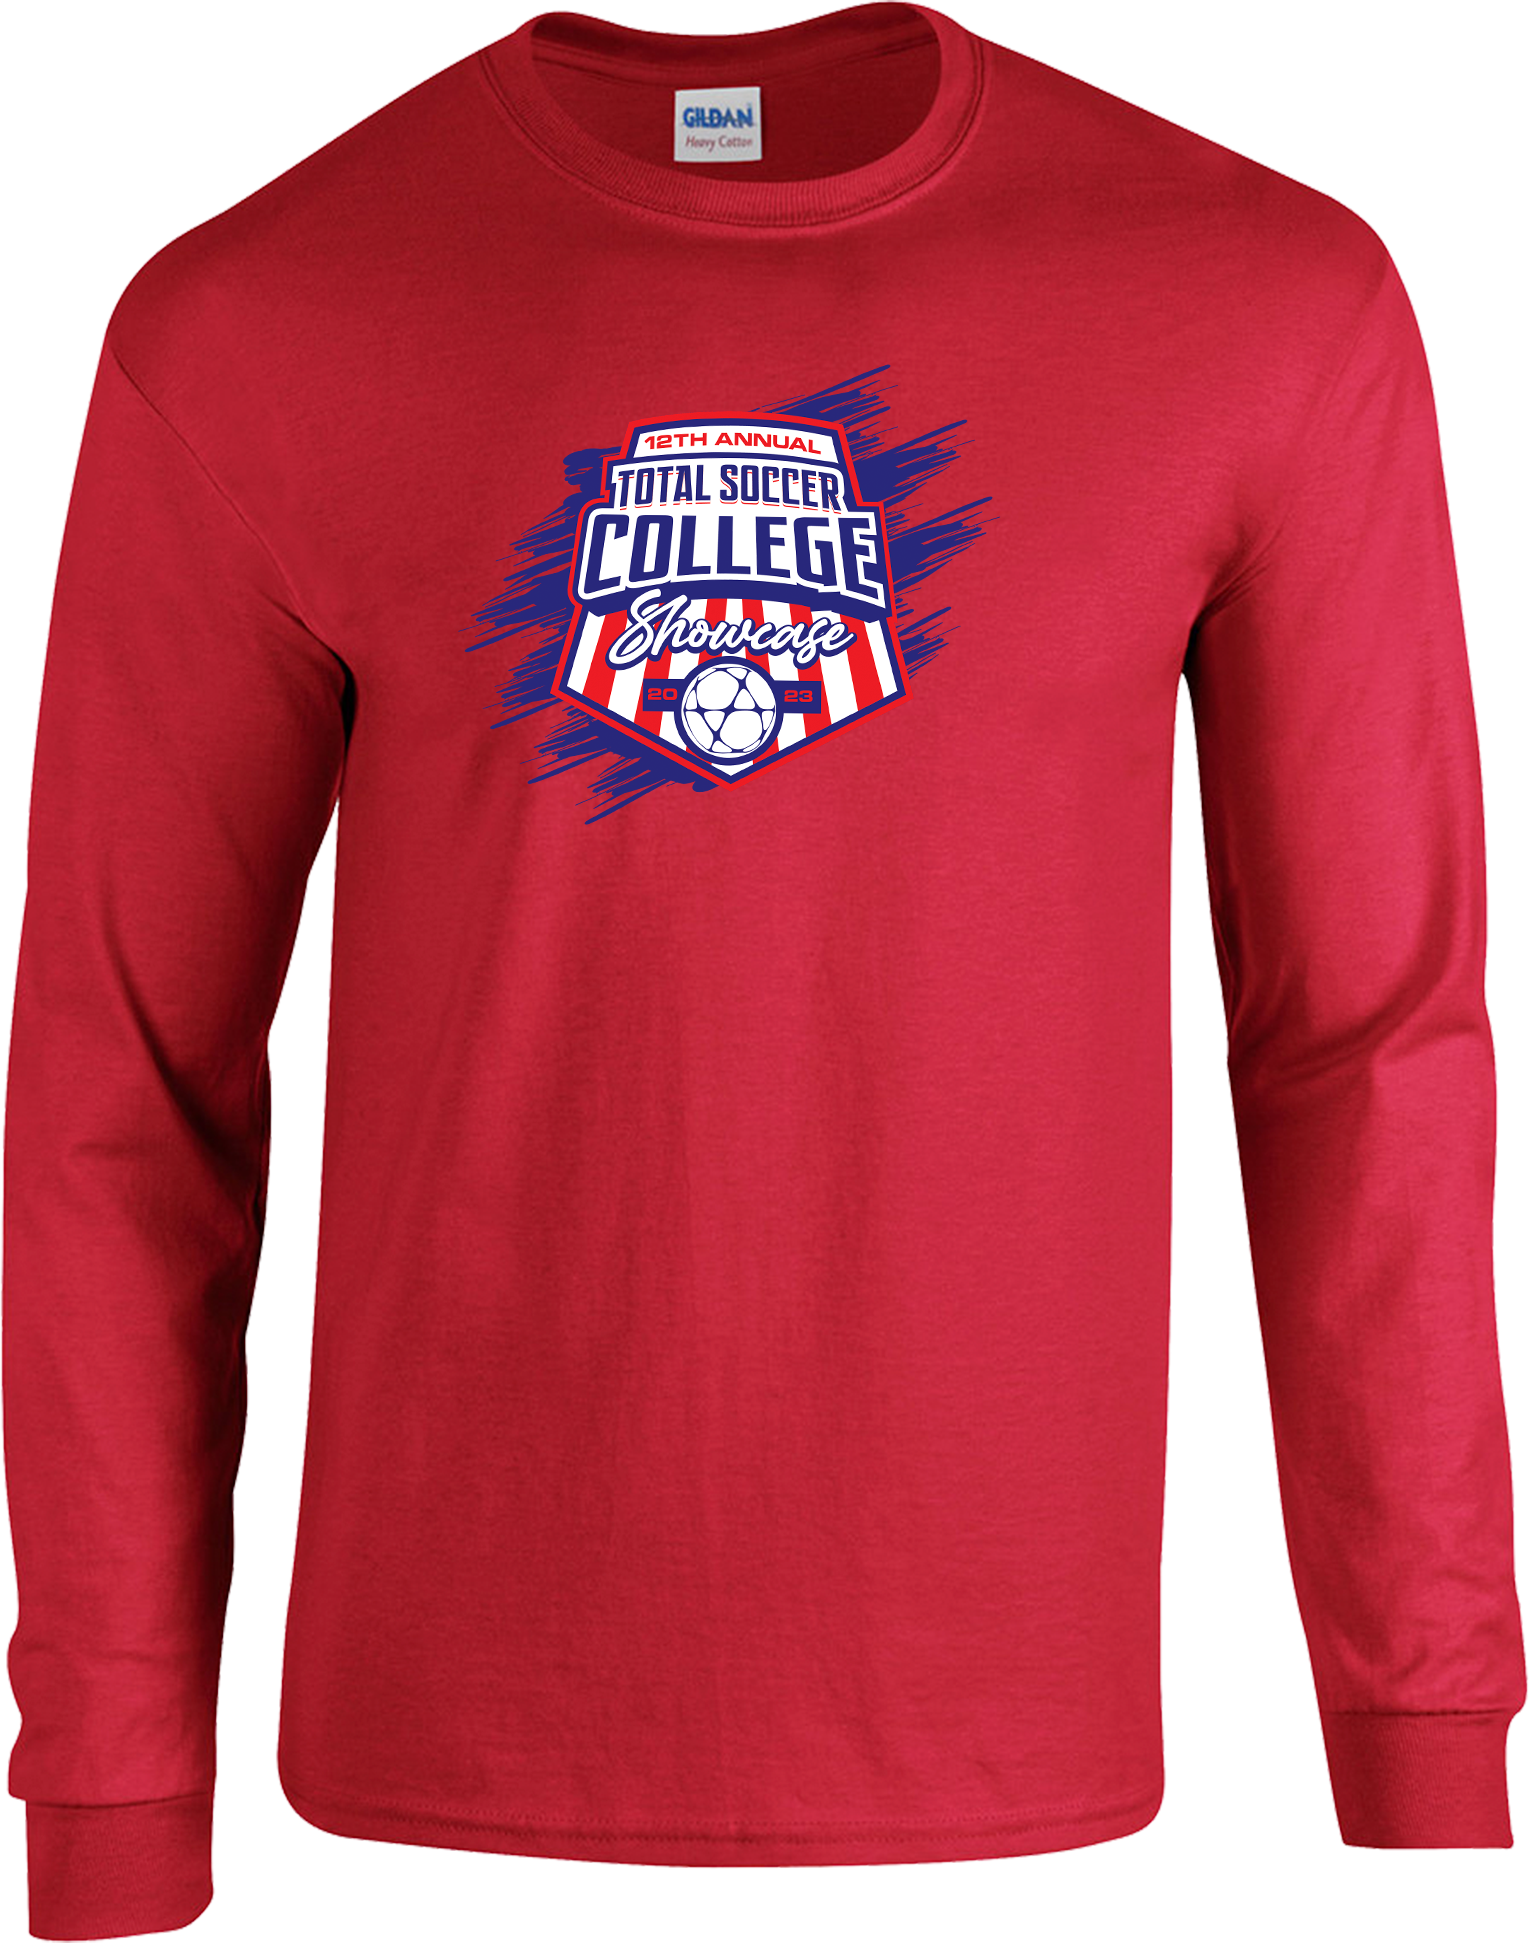 LONG SLEEVES - 2023 Total Soccer College Showcase